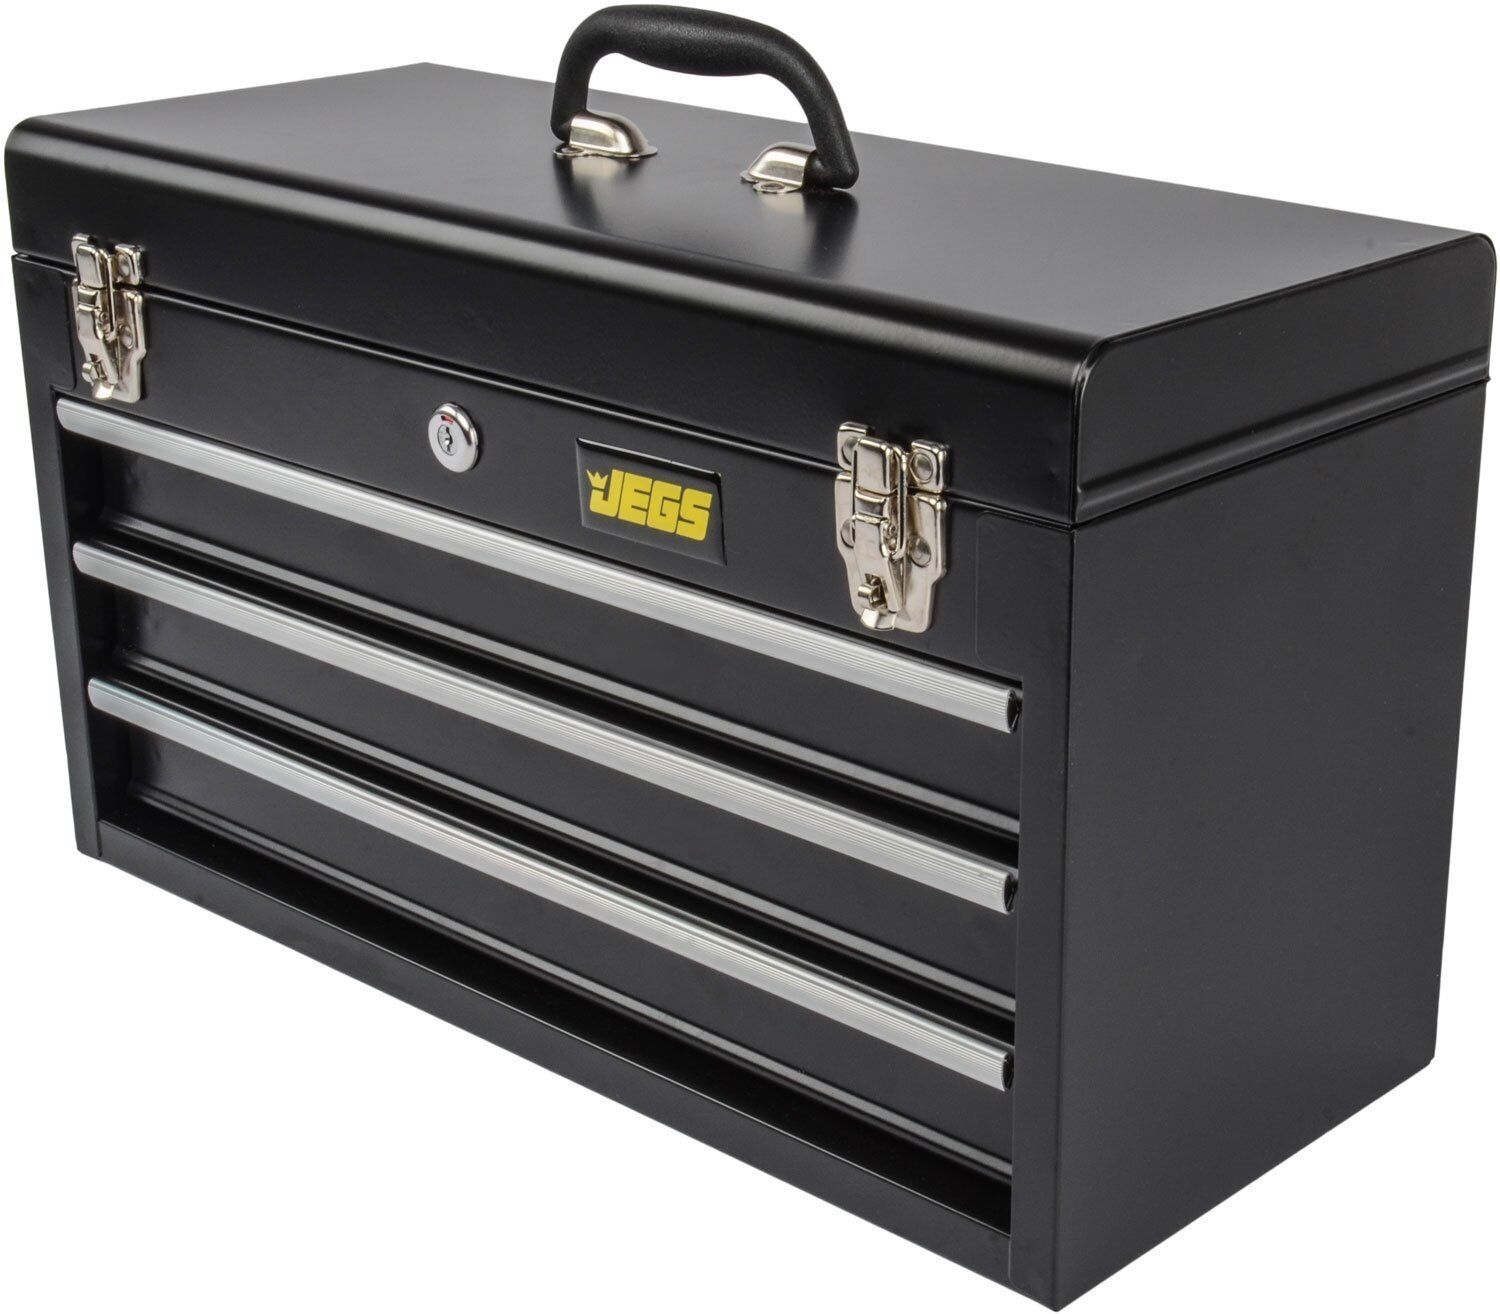 JEGS 81400 Black 3 Drawer Professional Tool Box for Garage, Truck, or Trailer